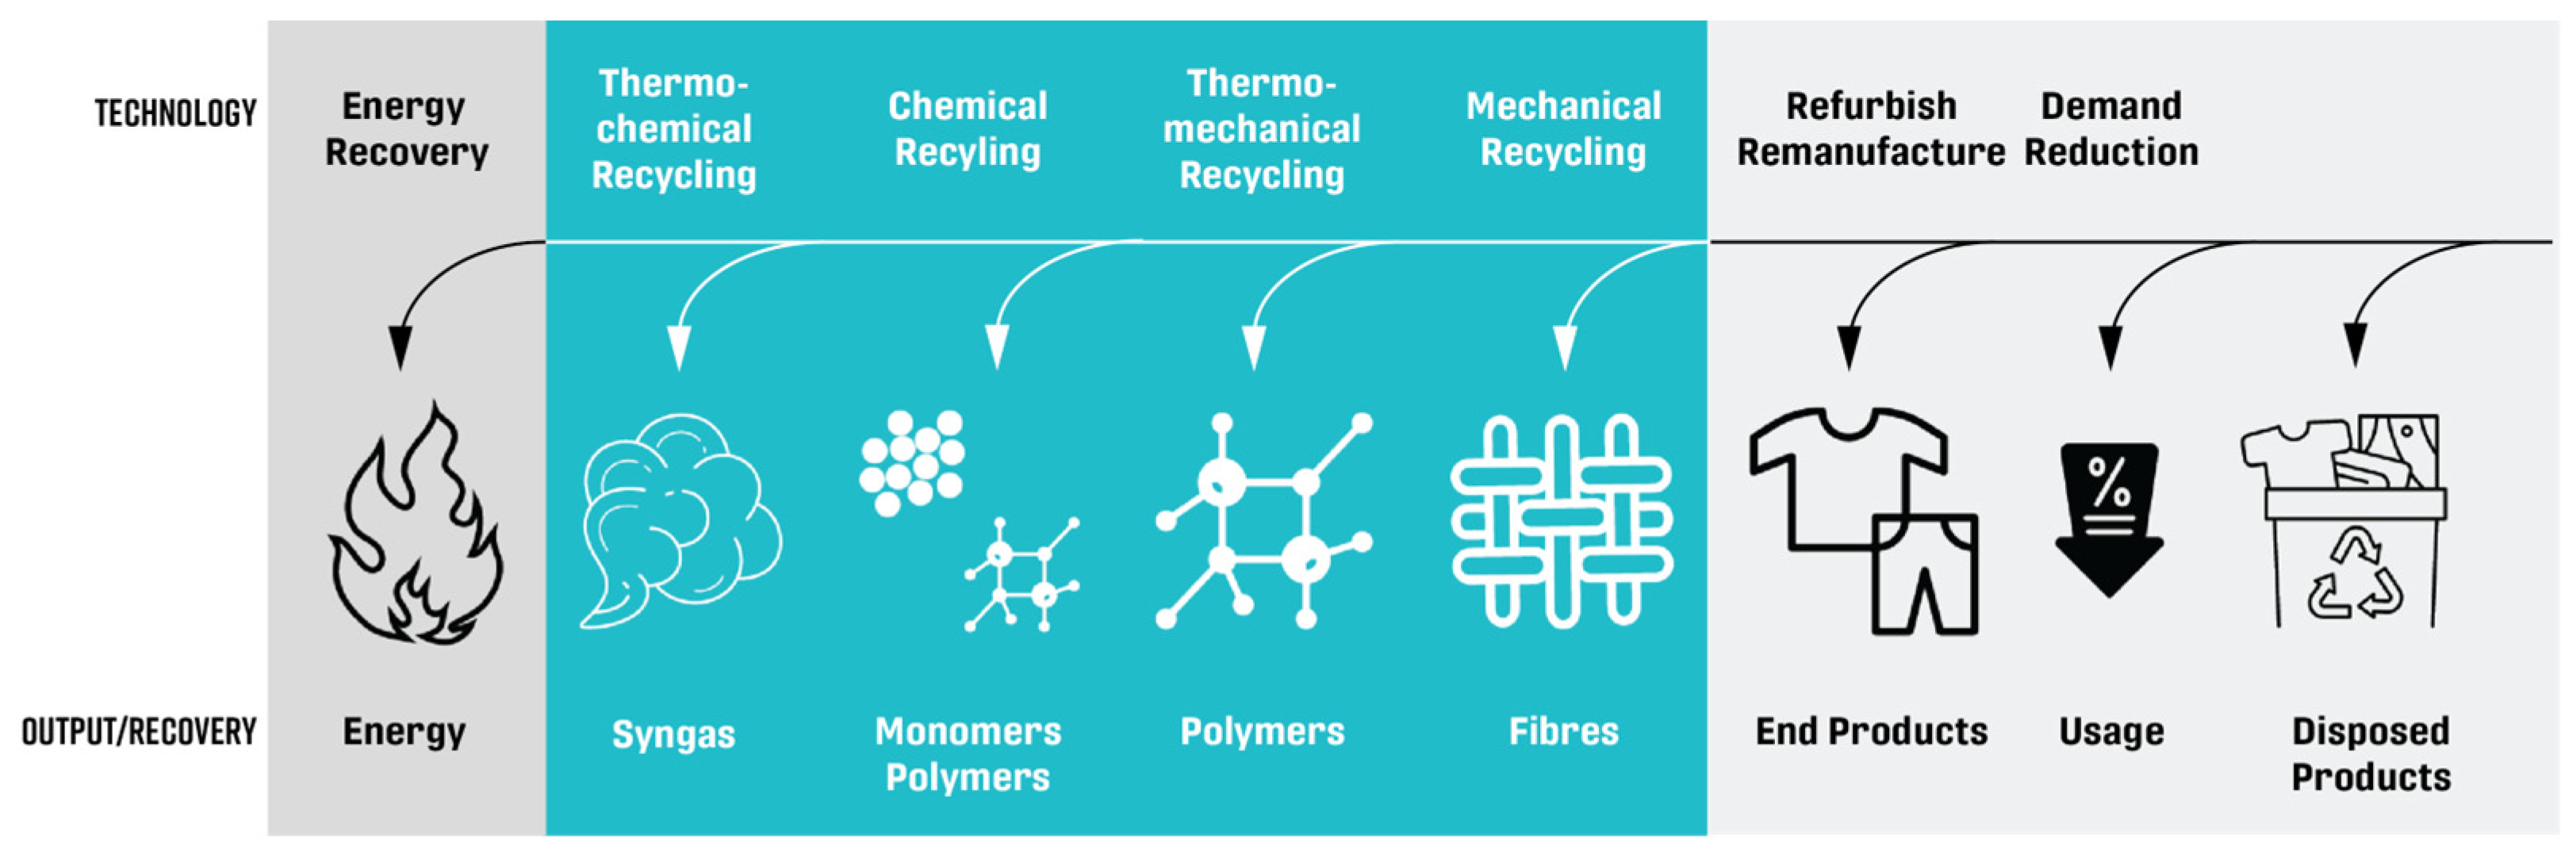 McKinsey : Could fiber-to-fiber recycling at scale be achieved by 2030?